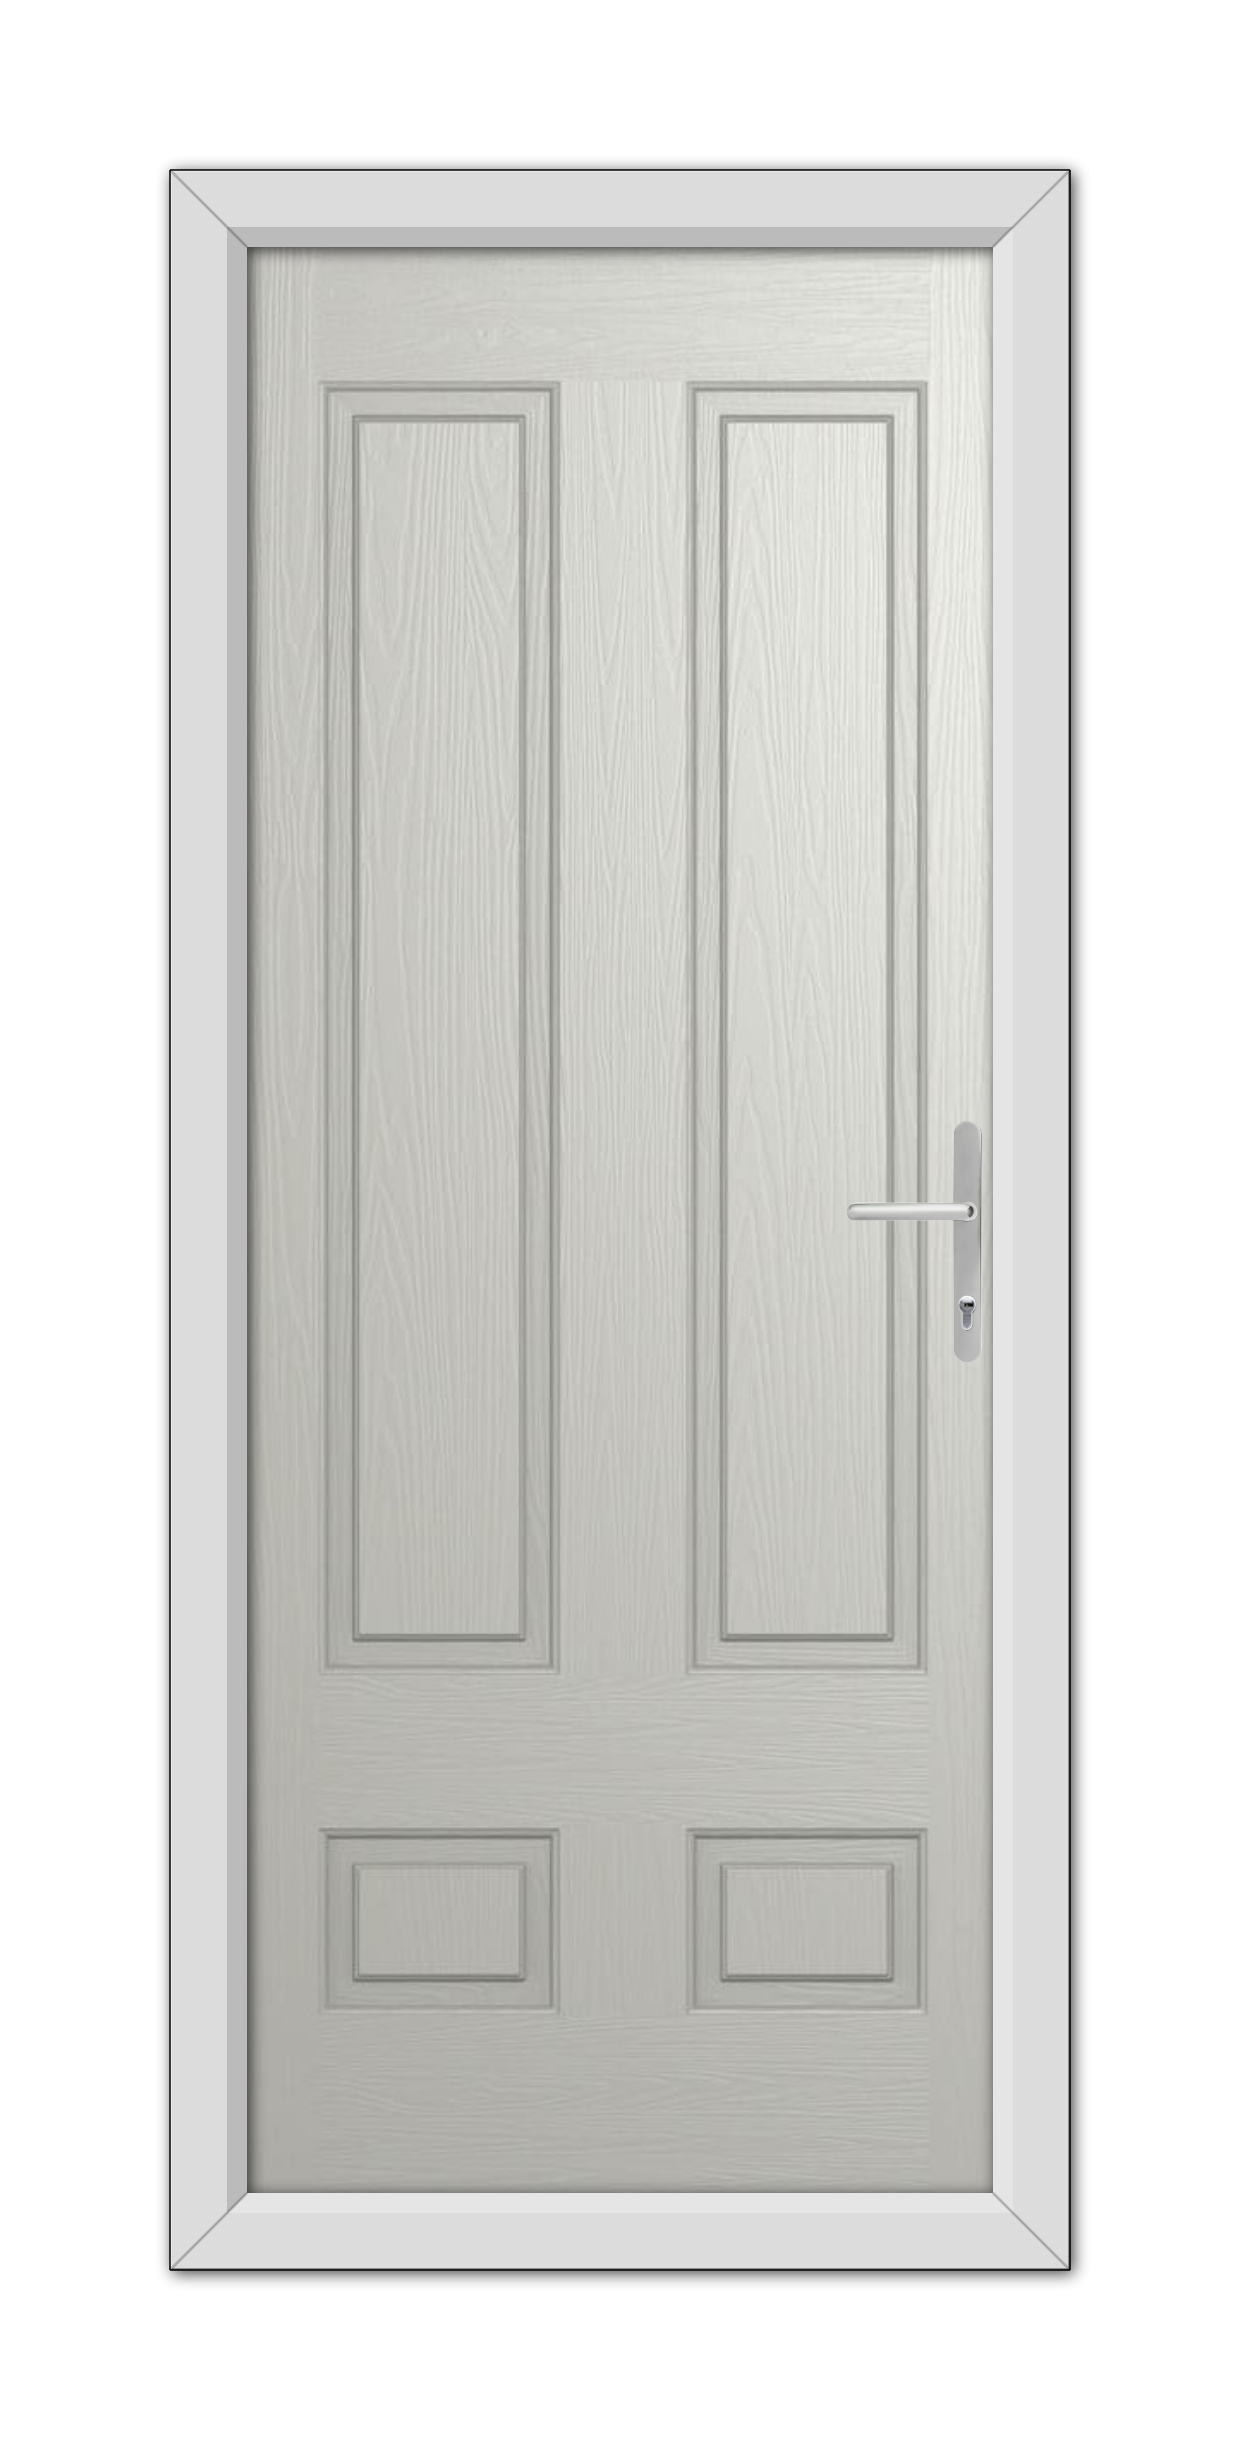 A modern Agate Grey Aston Solid Composite Door with a metallic handle, set within a simple frame, viewed frontally.